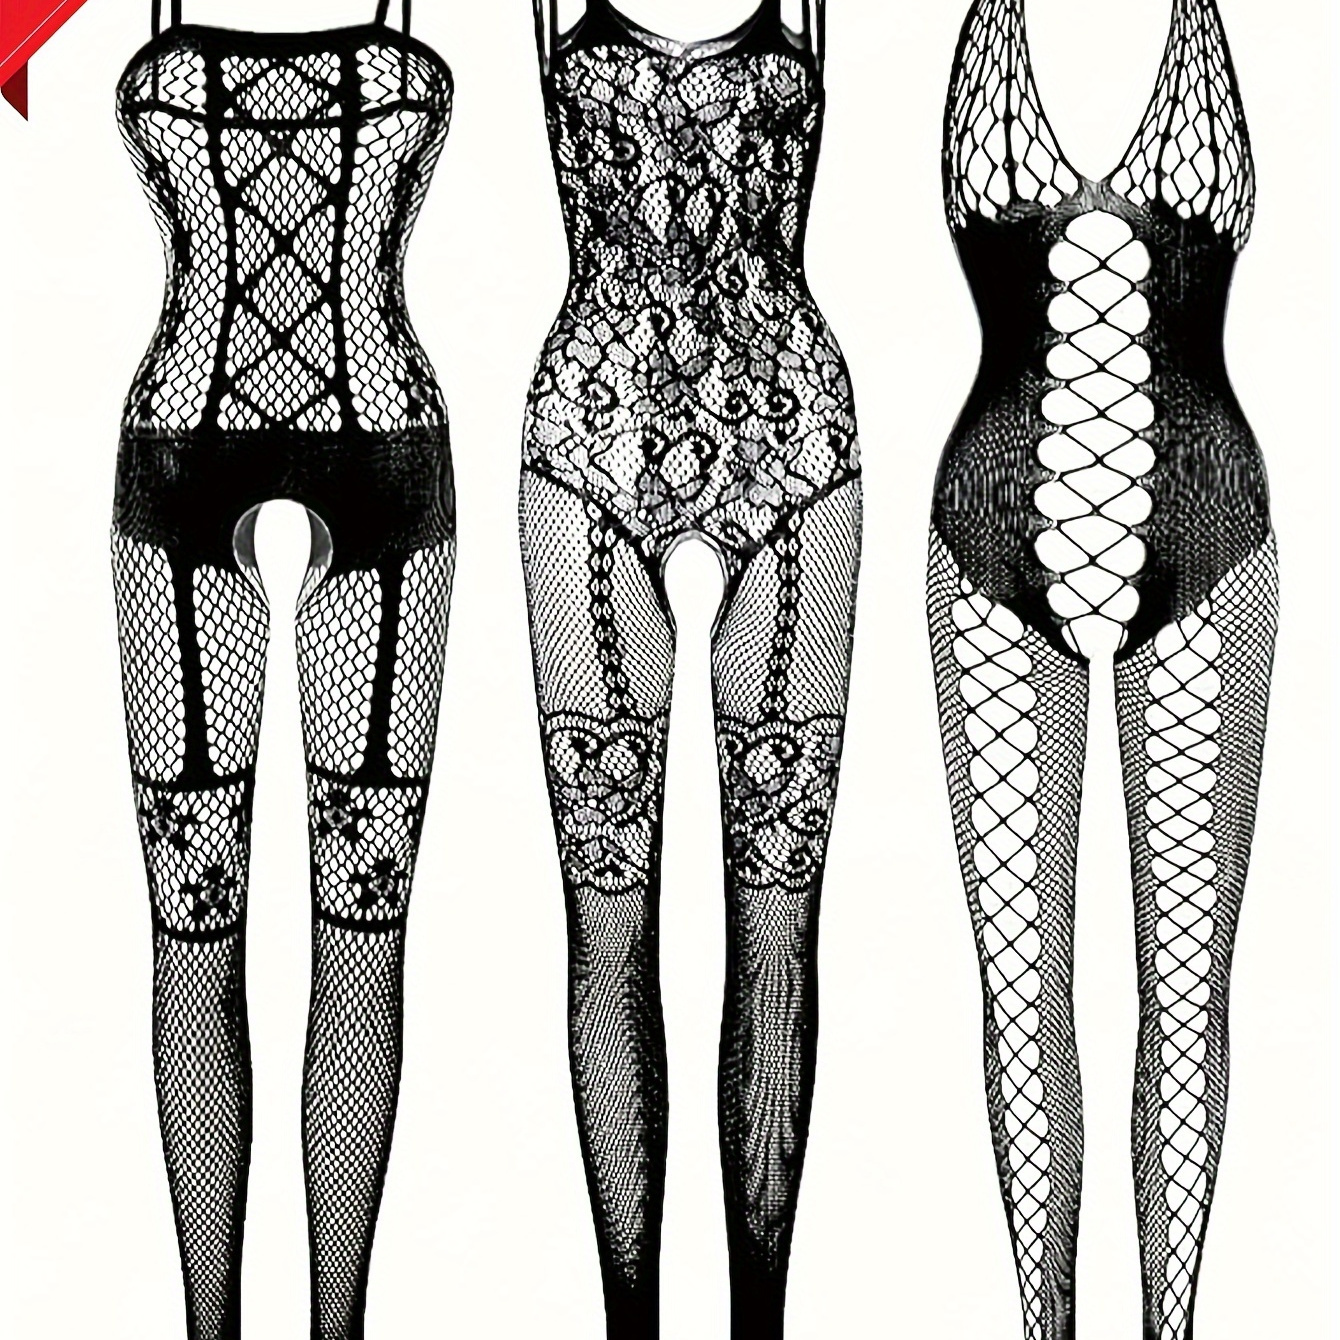 

3 Pcs ( Buy 1 Get 2 Free ) Hot Floral Jacquard Fishnet Bodystocking, Hollow Out Sleeveless Open Crotch Bodystocking, Women's Sexy Lingerie & Underwear